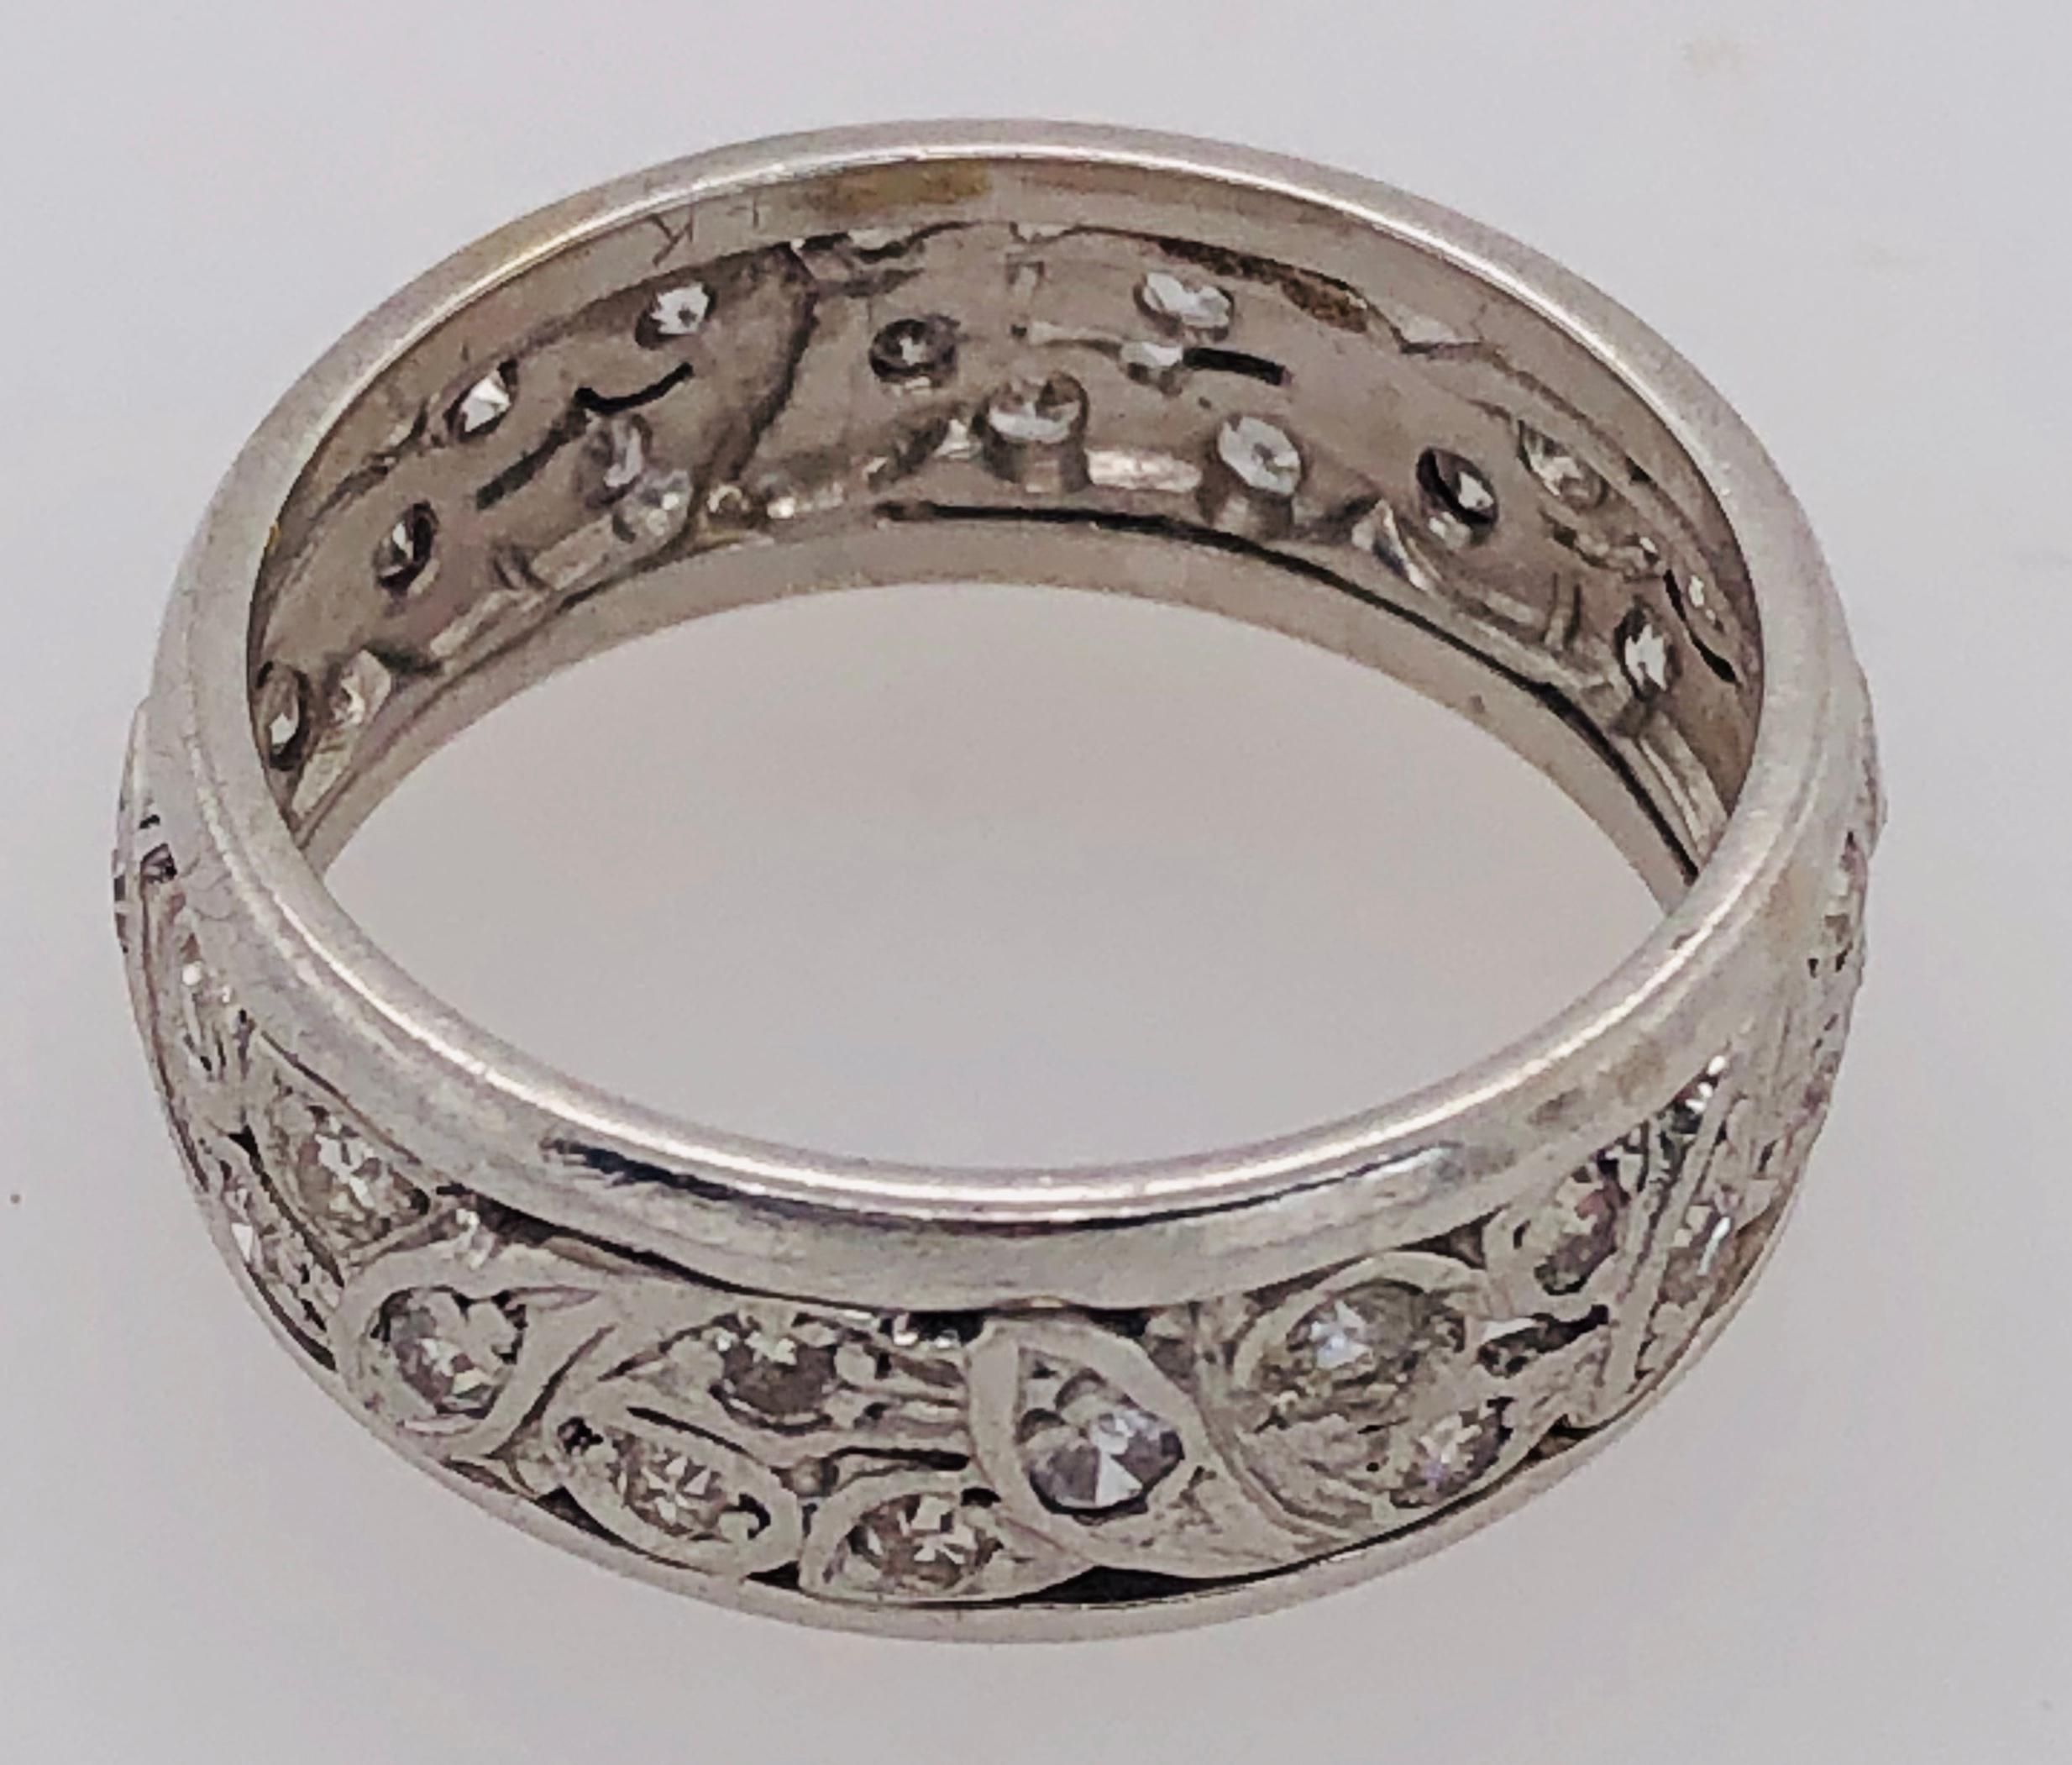 4Kt White Gold Eternity Wedding Band or Fashion Ring 
Size 6.55
1 Ct Total Diamond Weight.   
5.5 grams total weight.